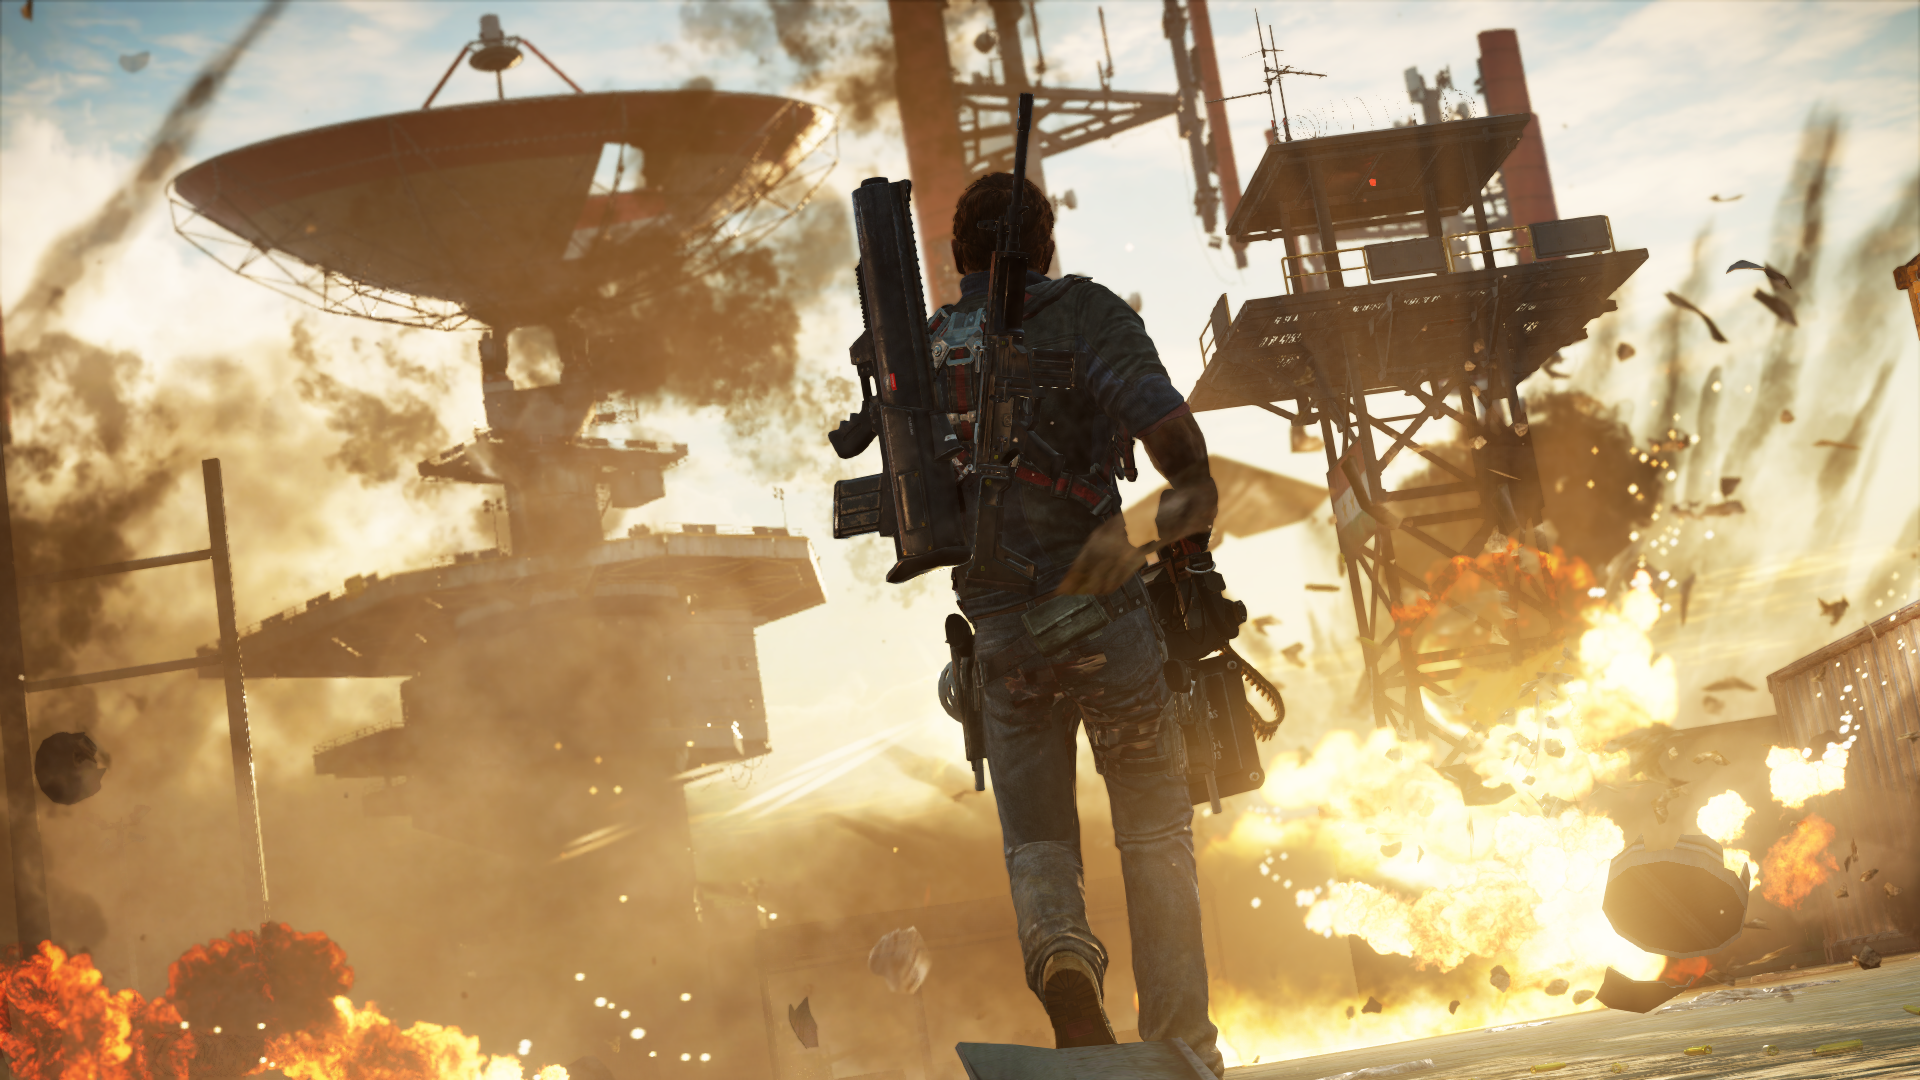 download just cause 3 for pc free